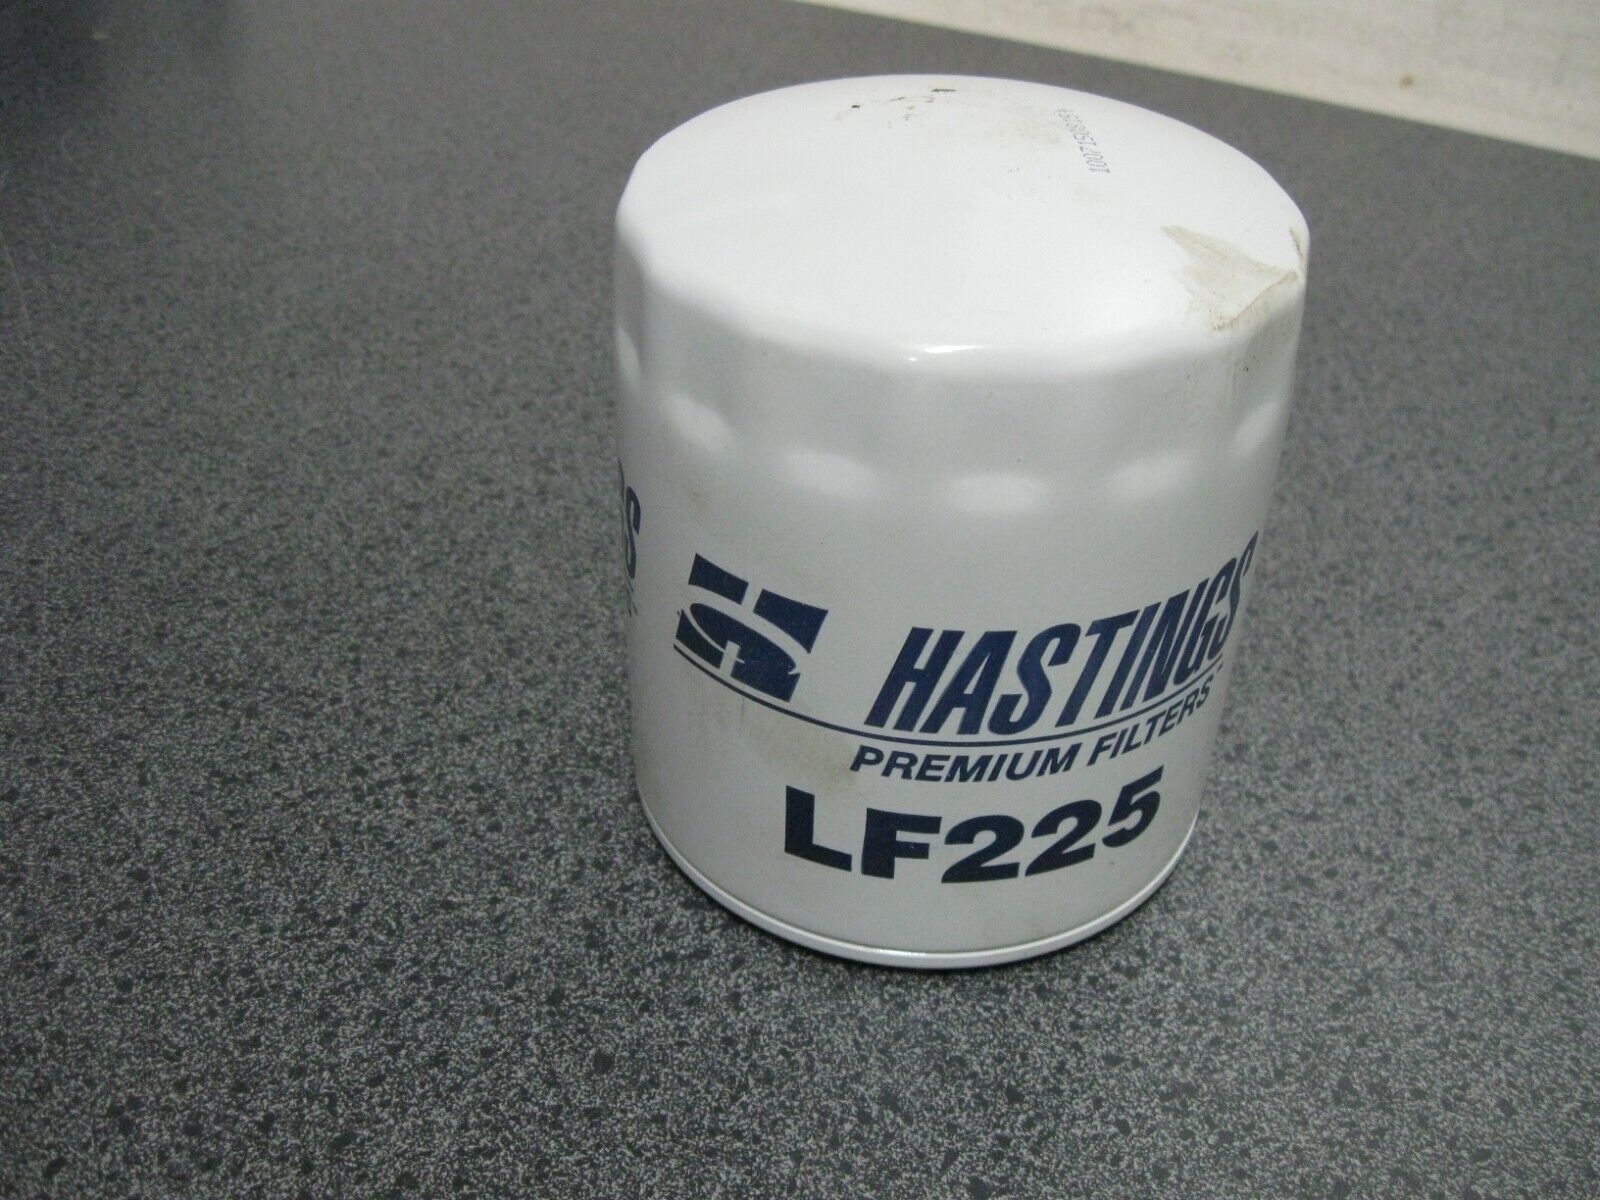 NEW HASTINGS ENGINE OIL FILTER (PN LF225)